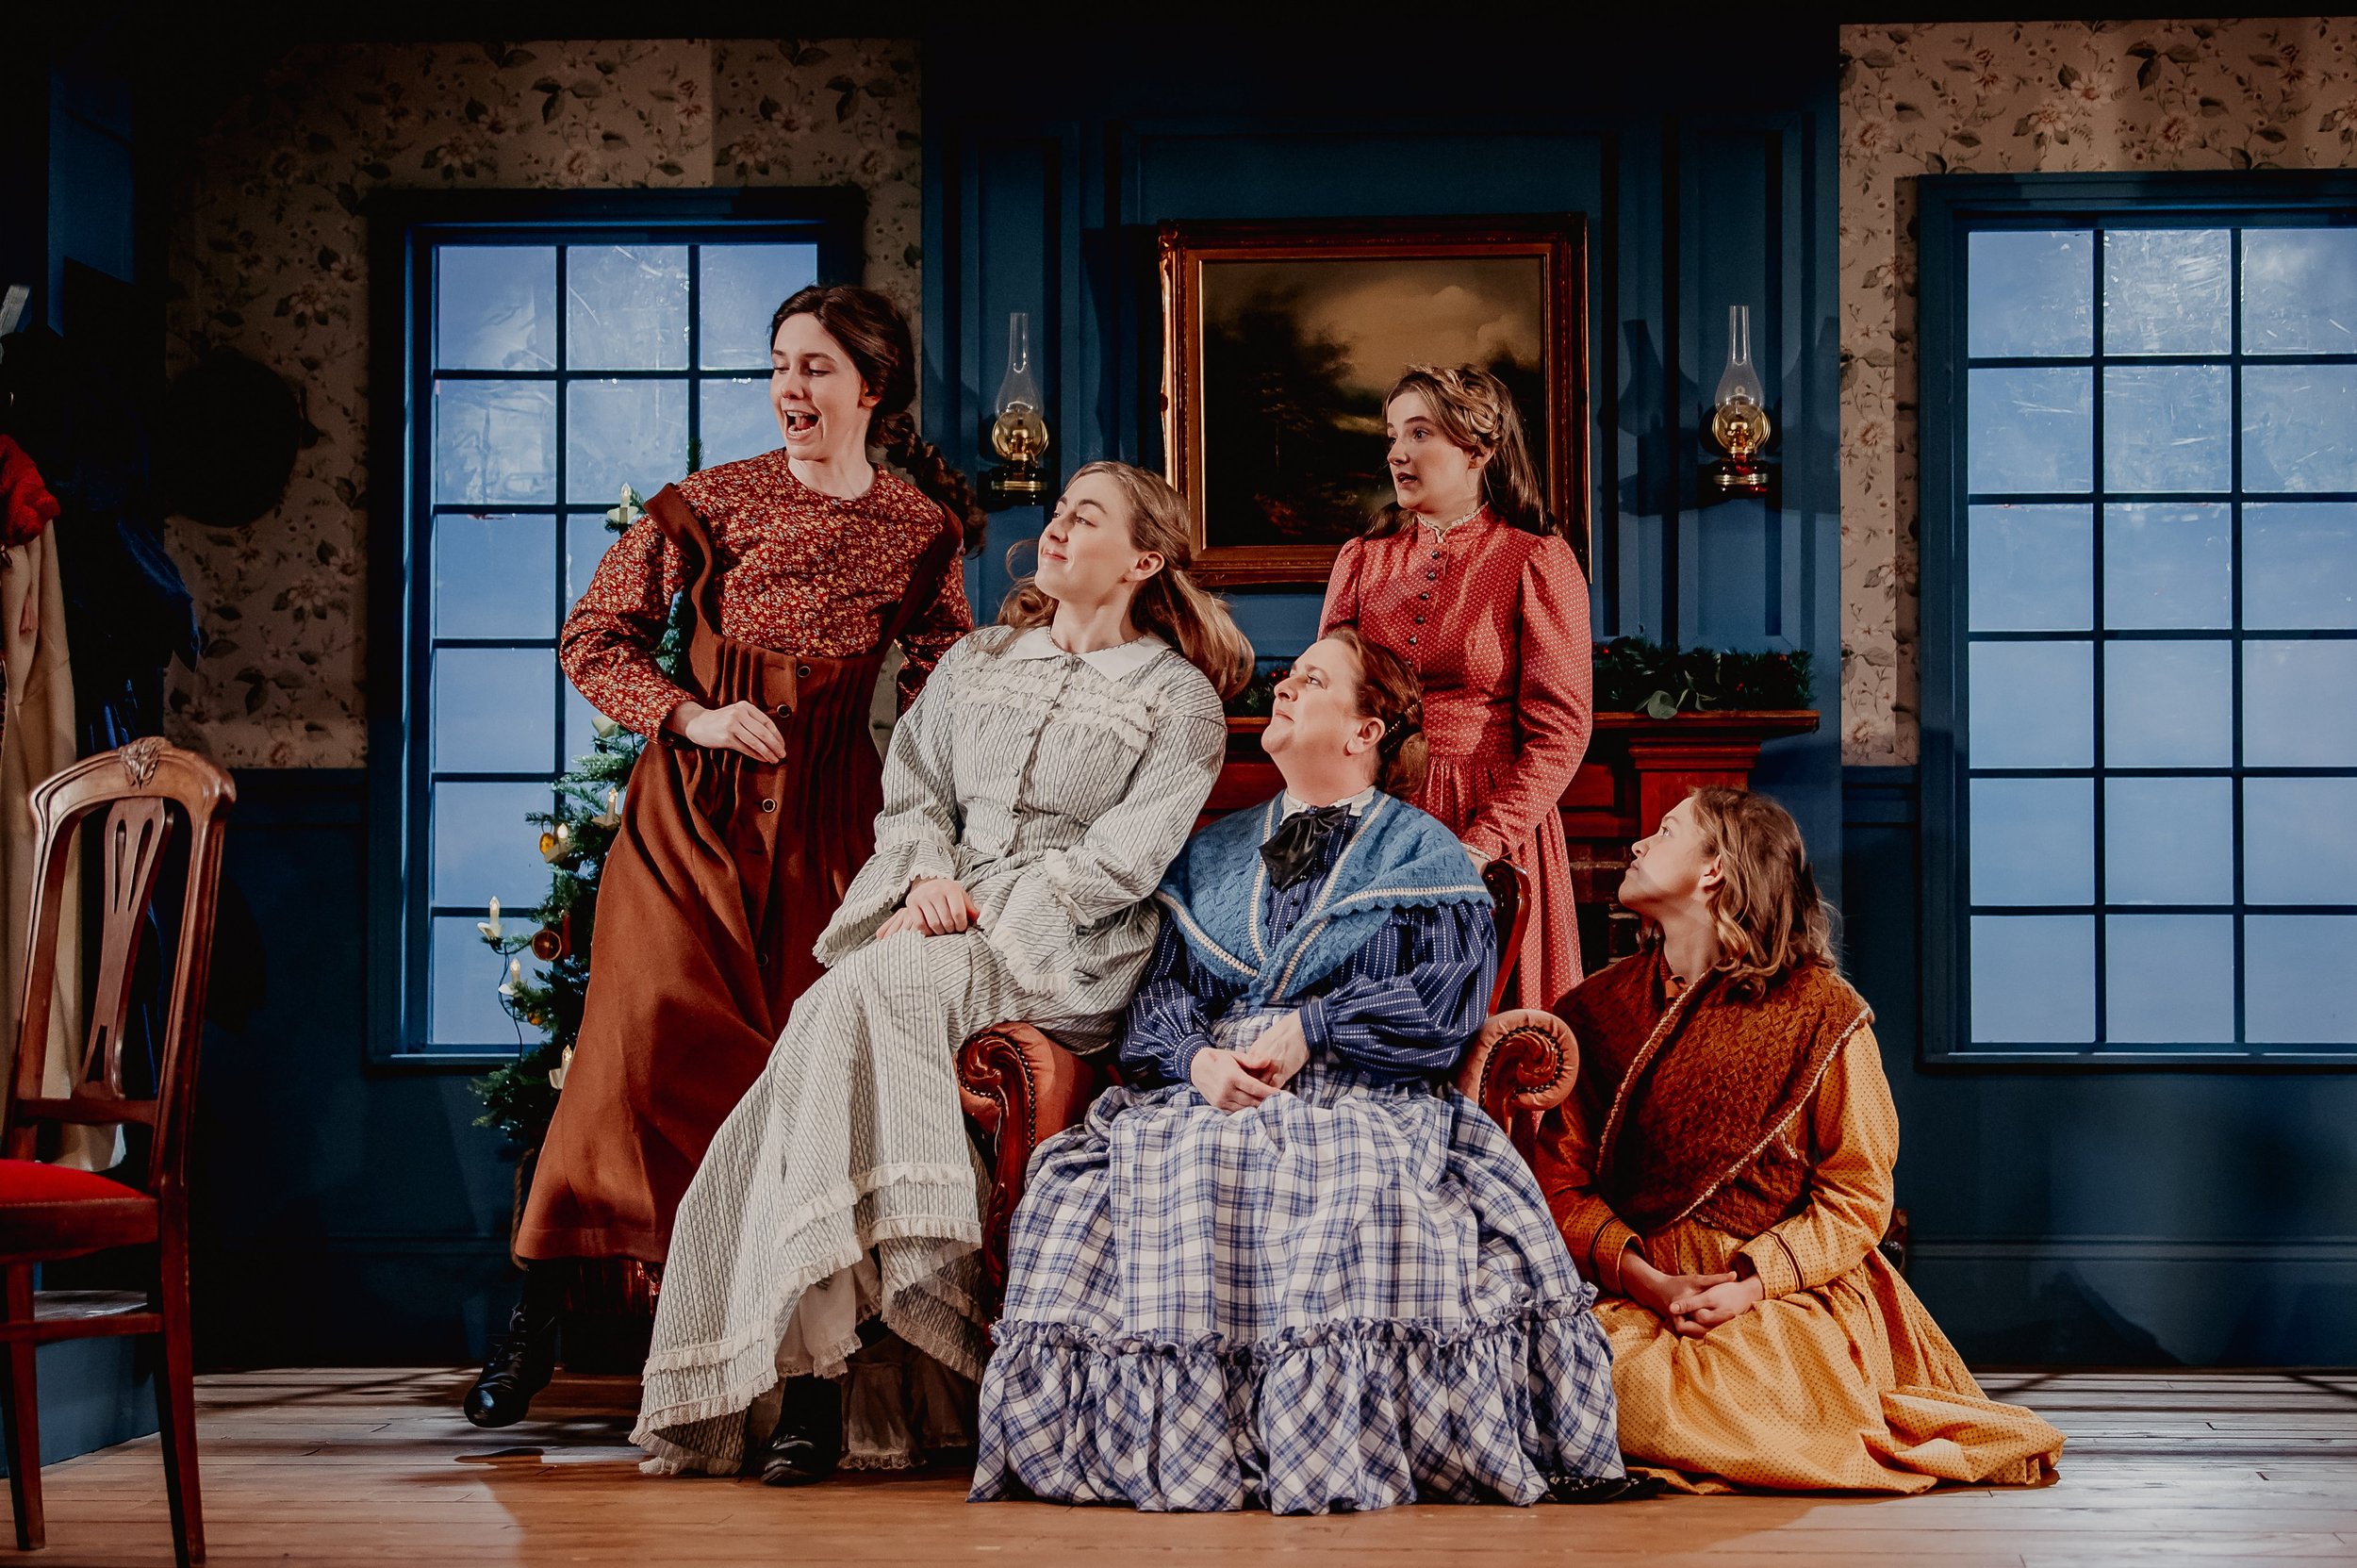 Ruby Campbell (second from left) plays Meg March in 'Little Women' (Lyric Theatre Belfast).